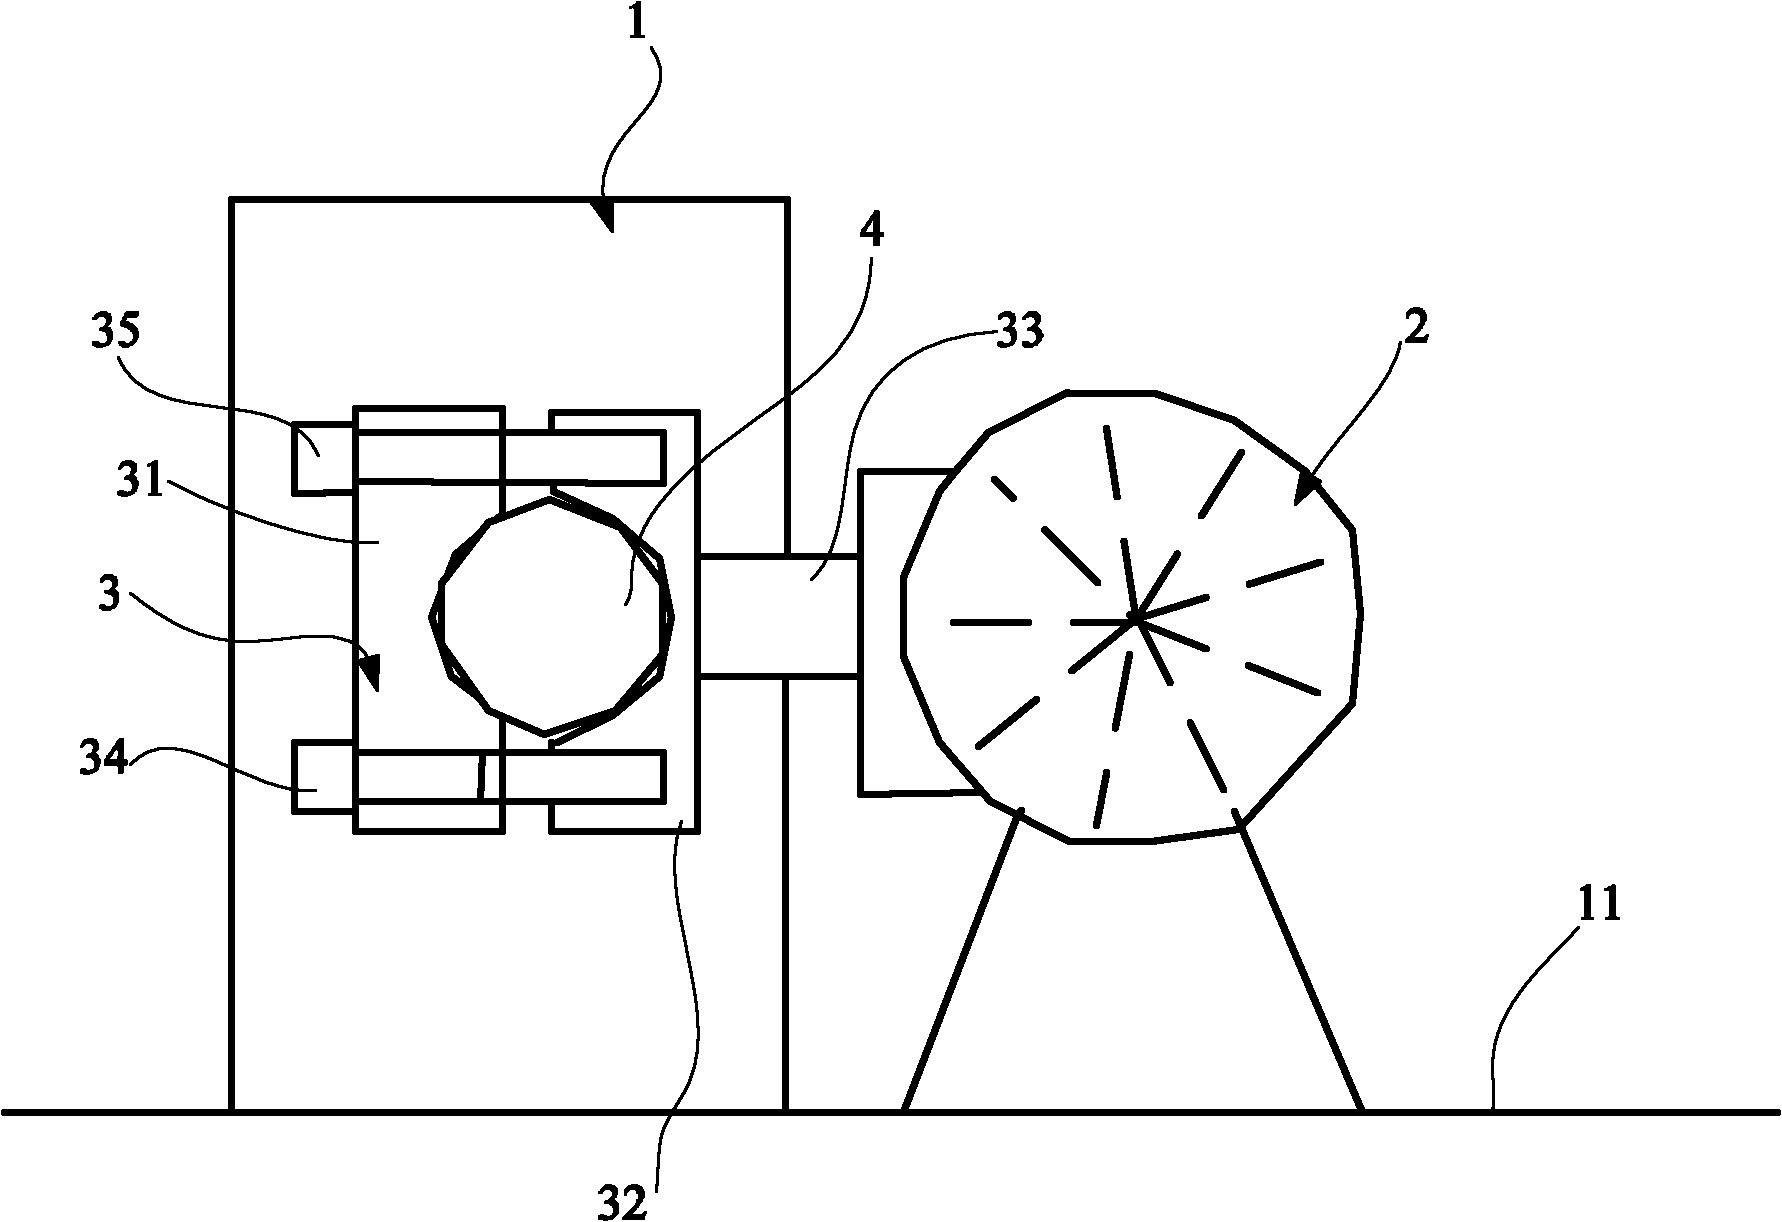 Central hole processing system and processing method of eccentric shaft